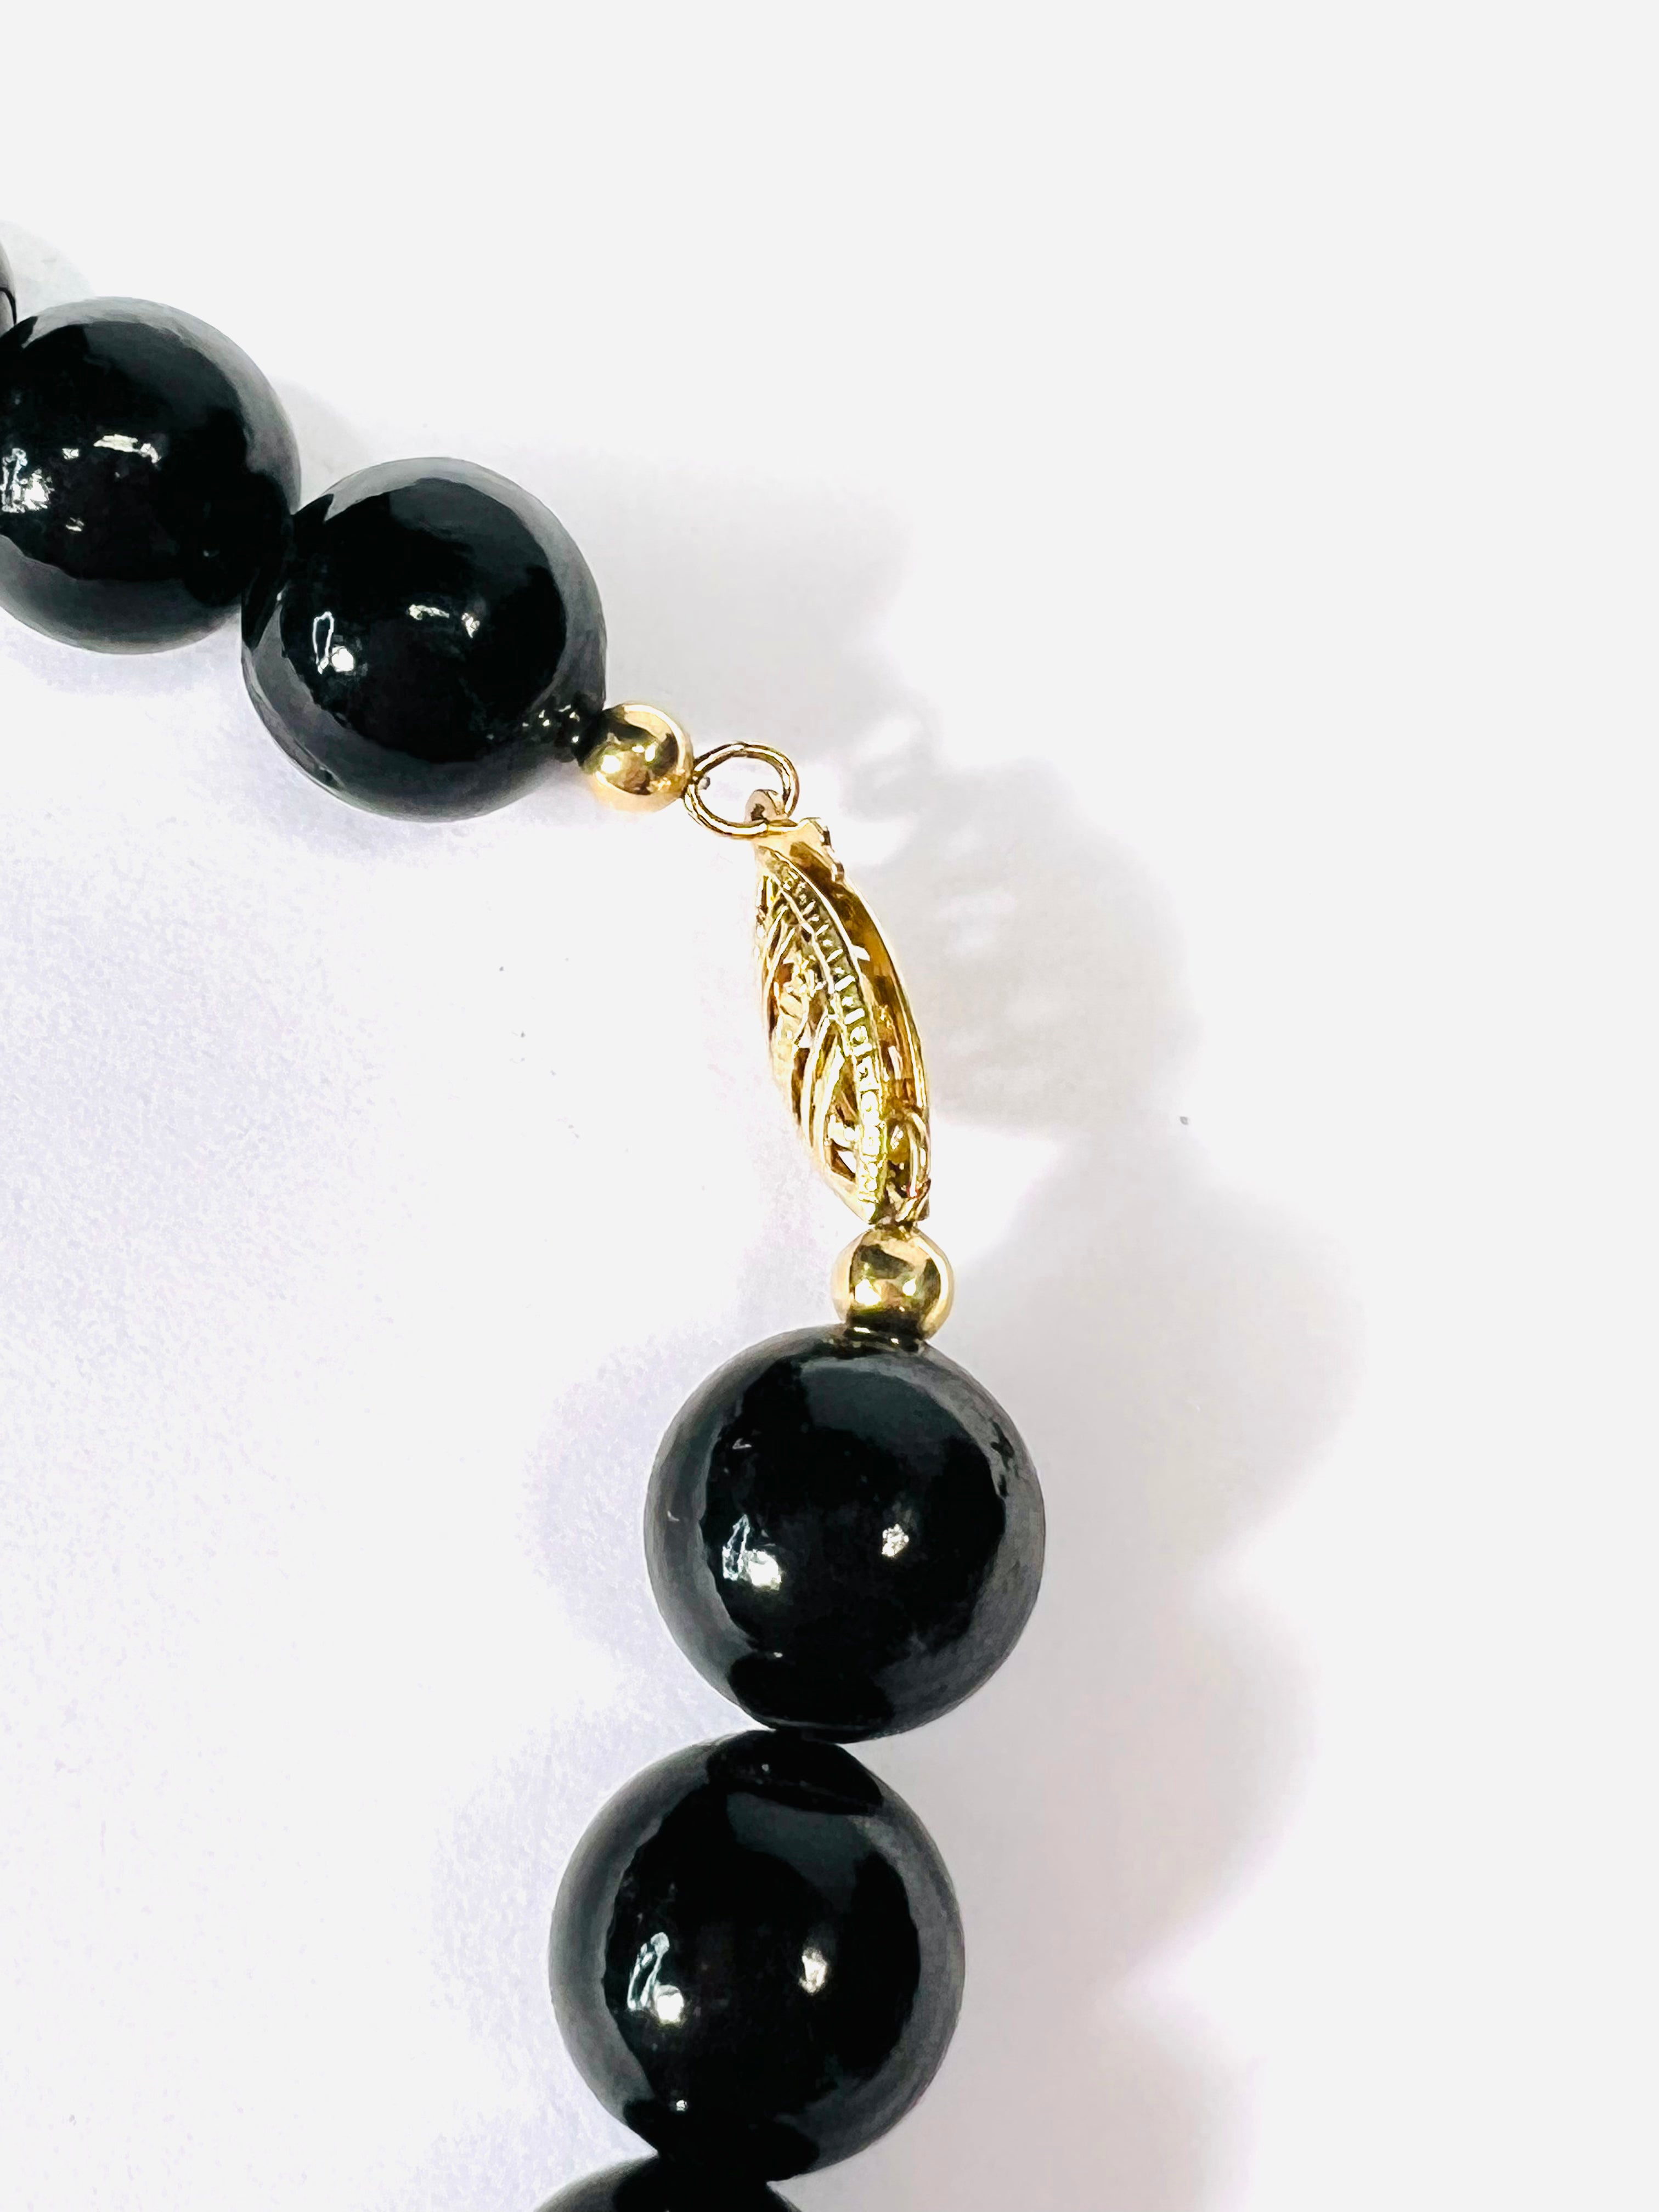 Black Coral Bead 14K Yellow Gold Claps Necklace